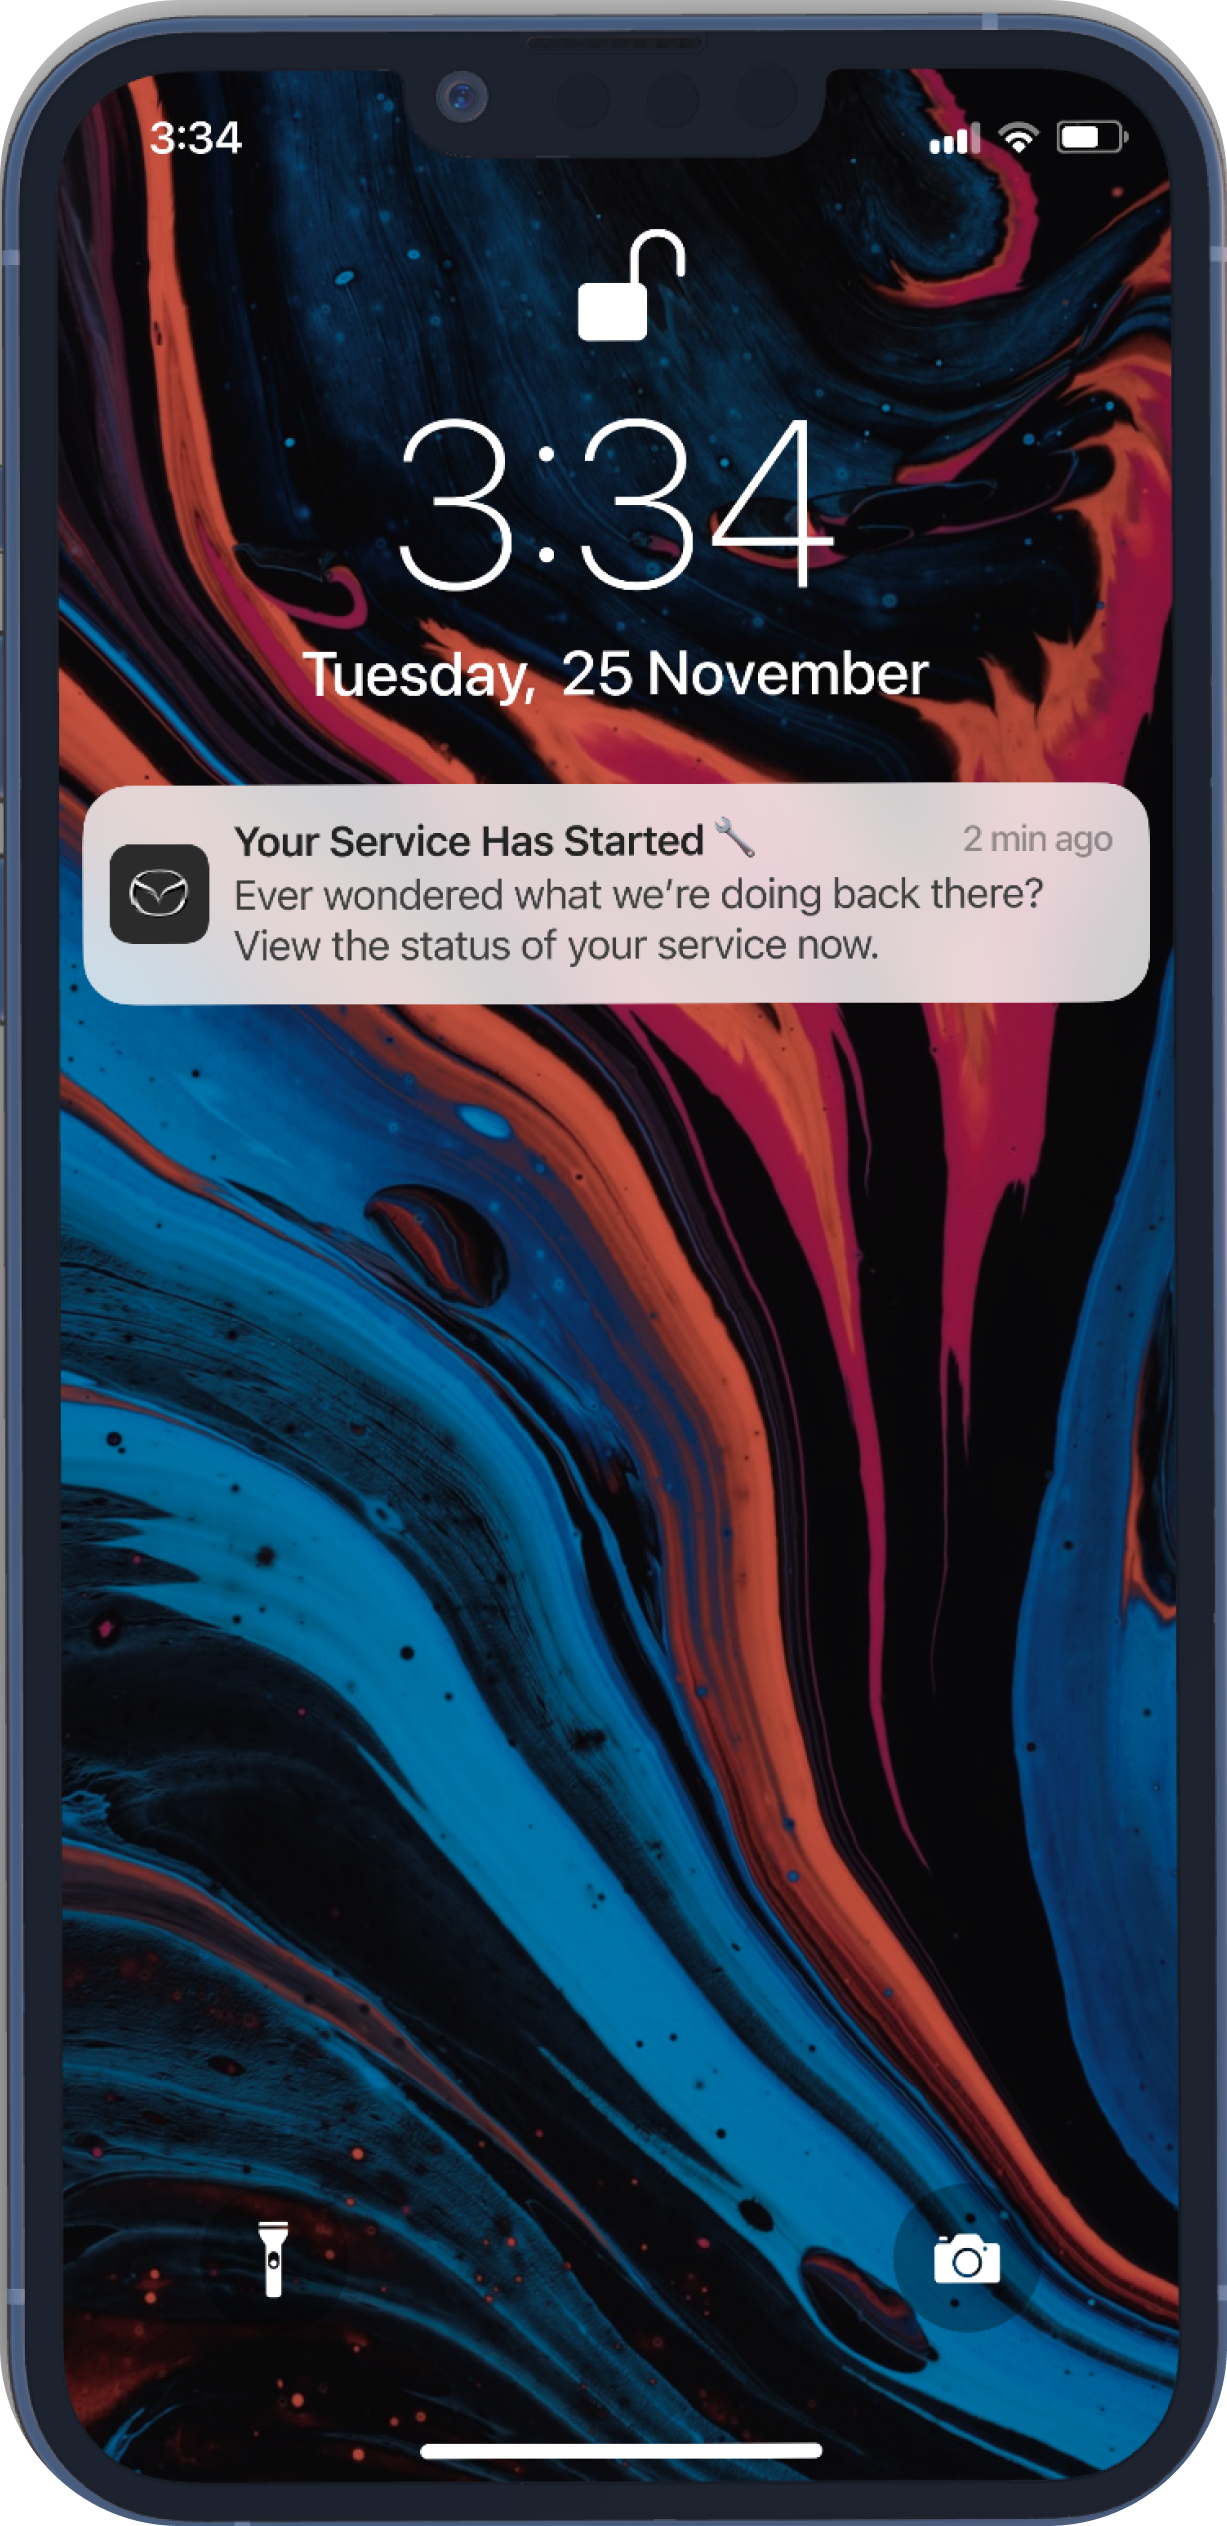 A screenshot of an iPhone lockscreen with a notification that a service has started